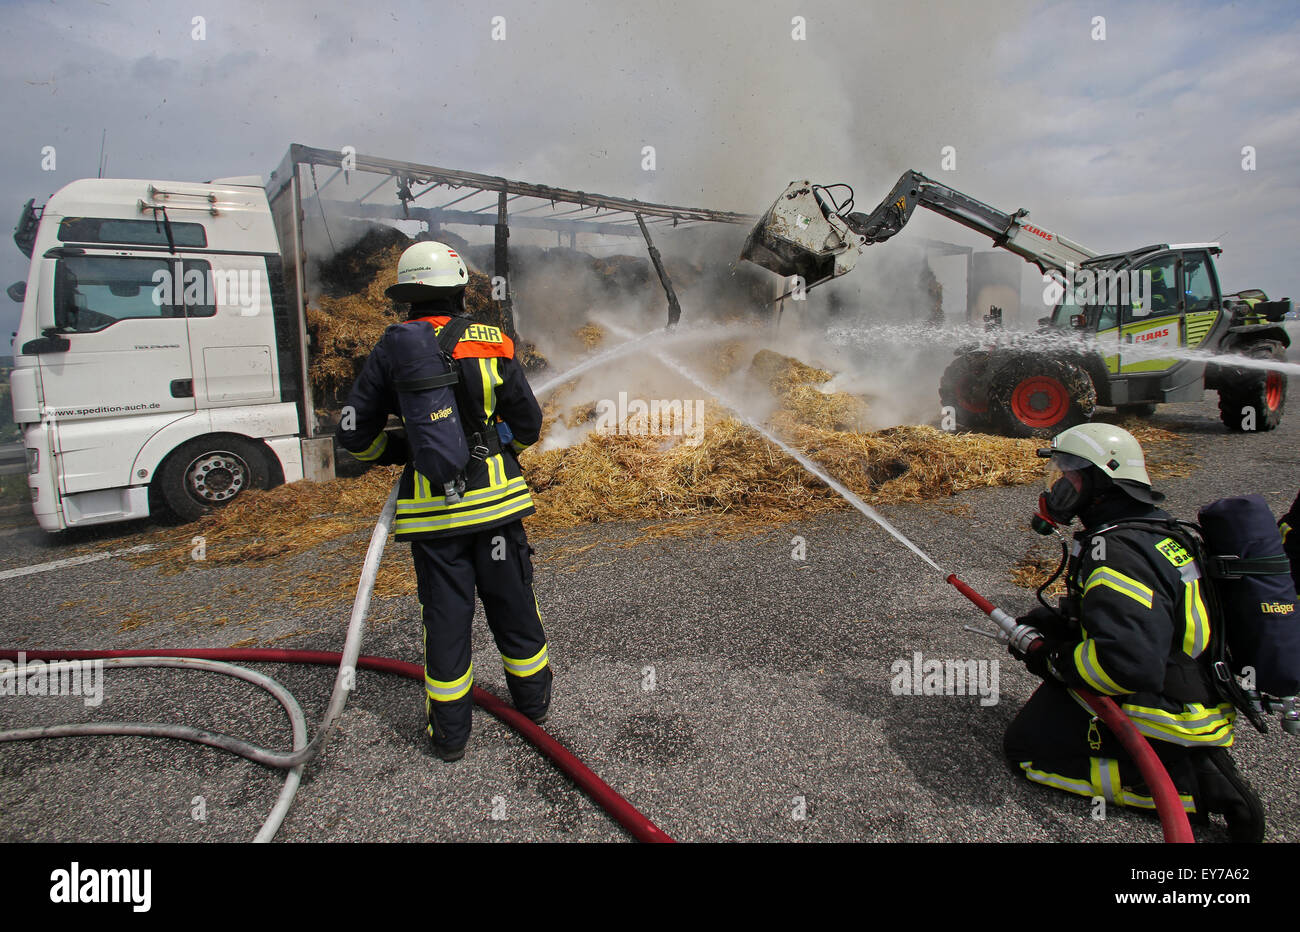 Rostock, Germany. 23rd July, 2015. Burning bales of straw on a truck on the A 20 motorway led to a major operation by the fire services near Rostock, Germany, 23 July 2015. The lanes between Bad Doberan and Kroepelin heading towards Luebeck were closed. PHOTO: BERND WUESTNECK/DPA/Alamy Live News Stock Photo